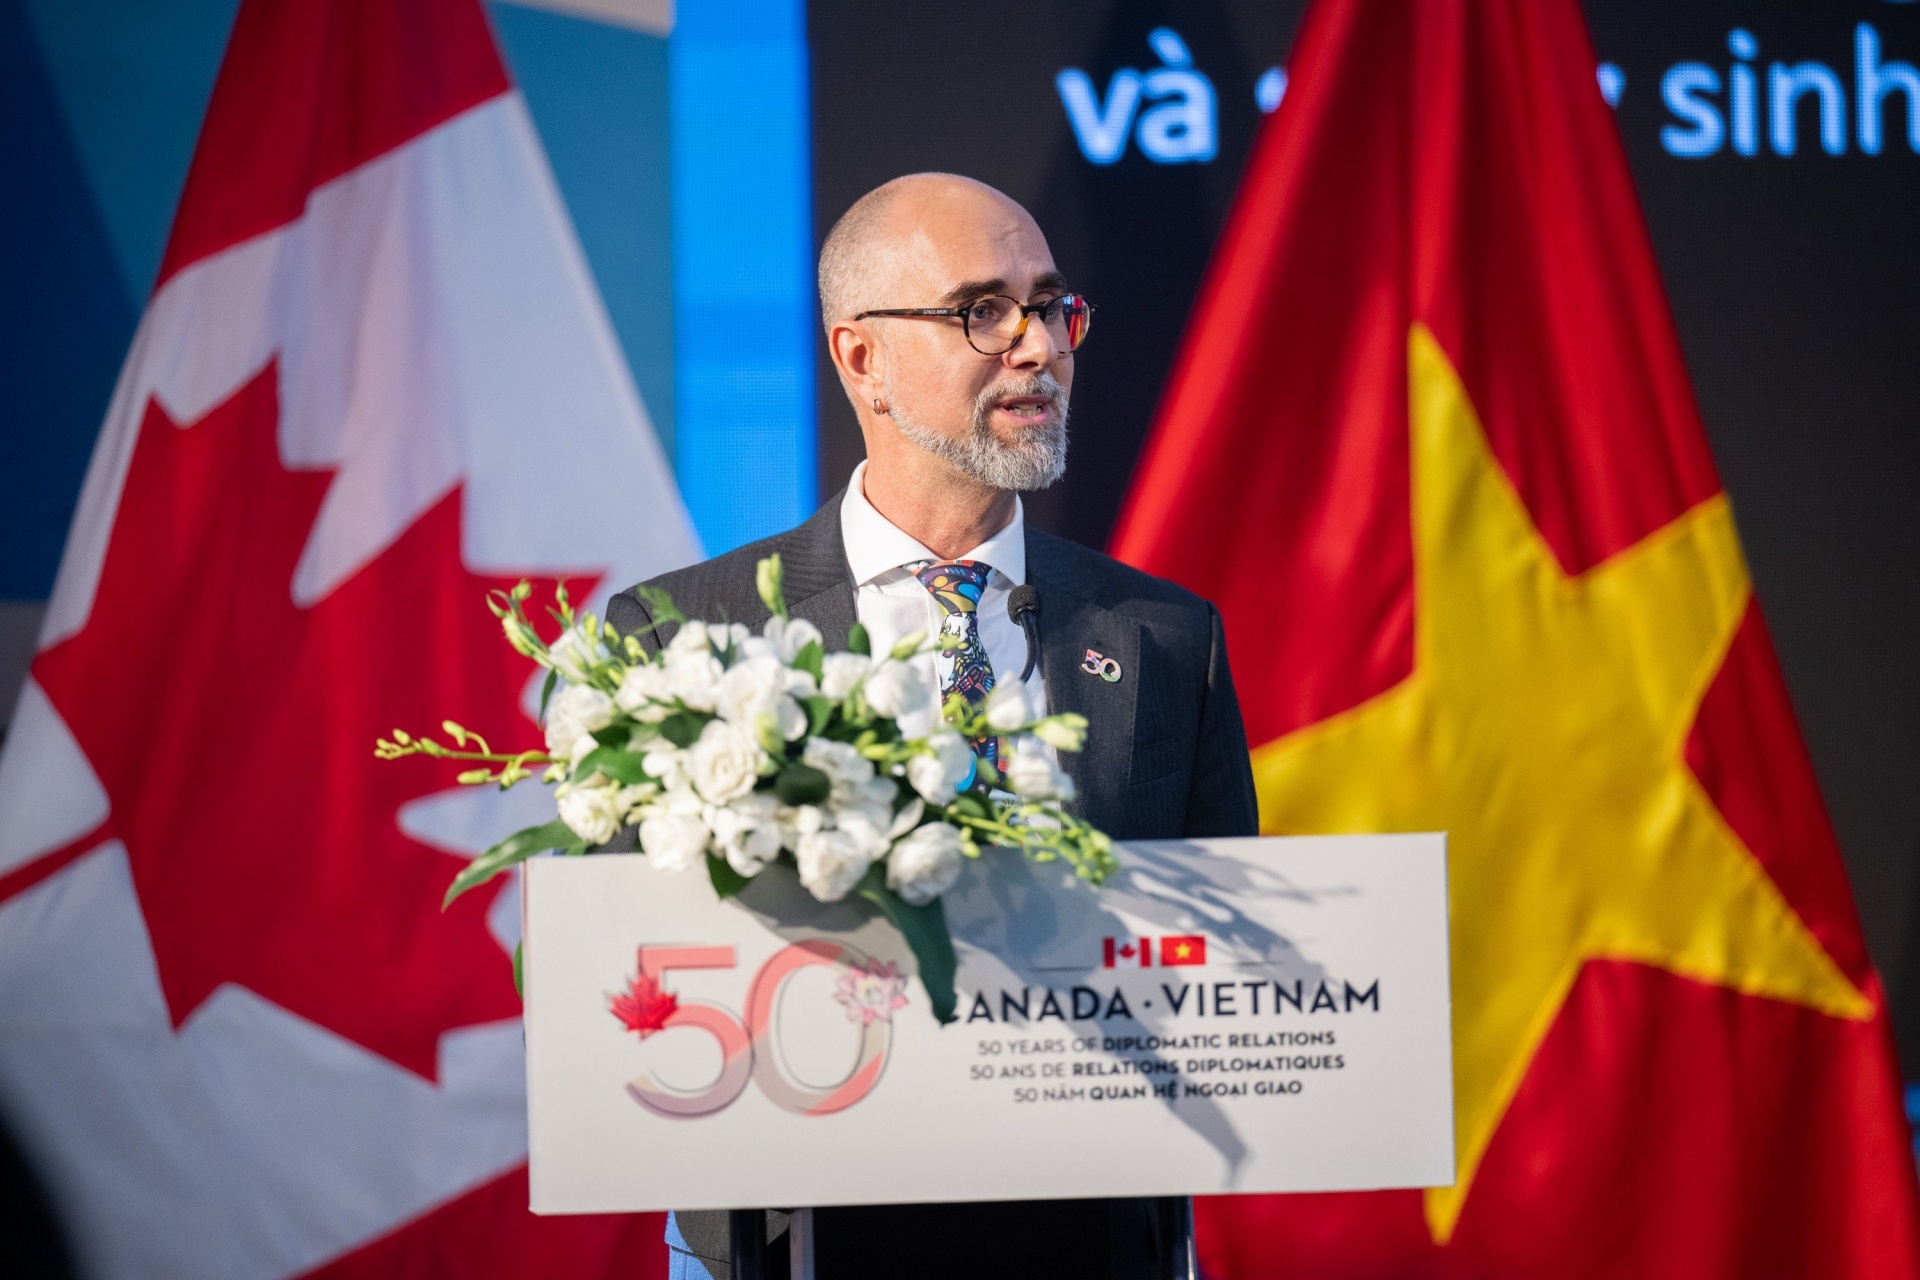 Canada and Vietnam commemorate 50th year of diplomatic relations